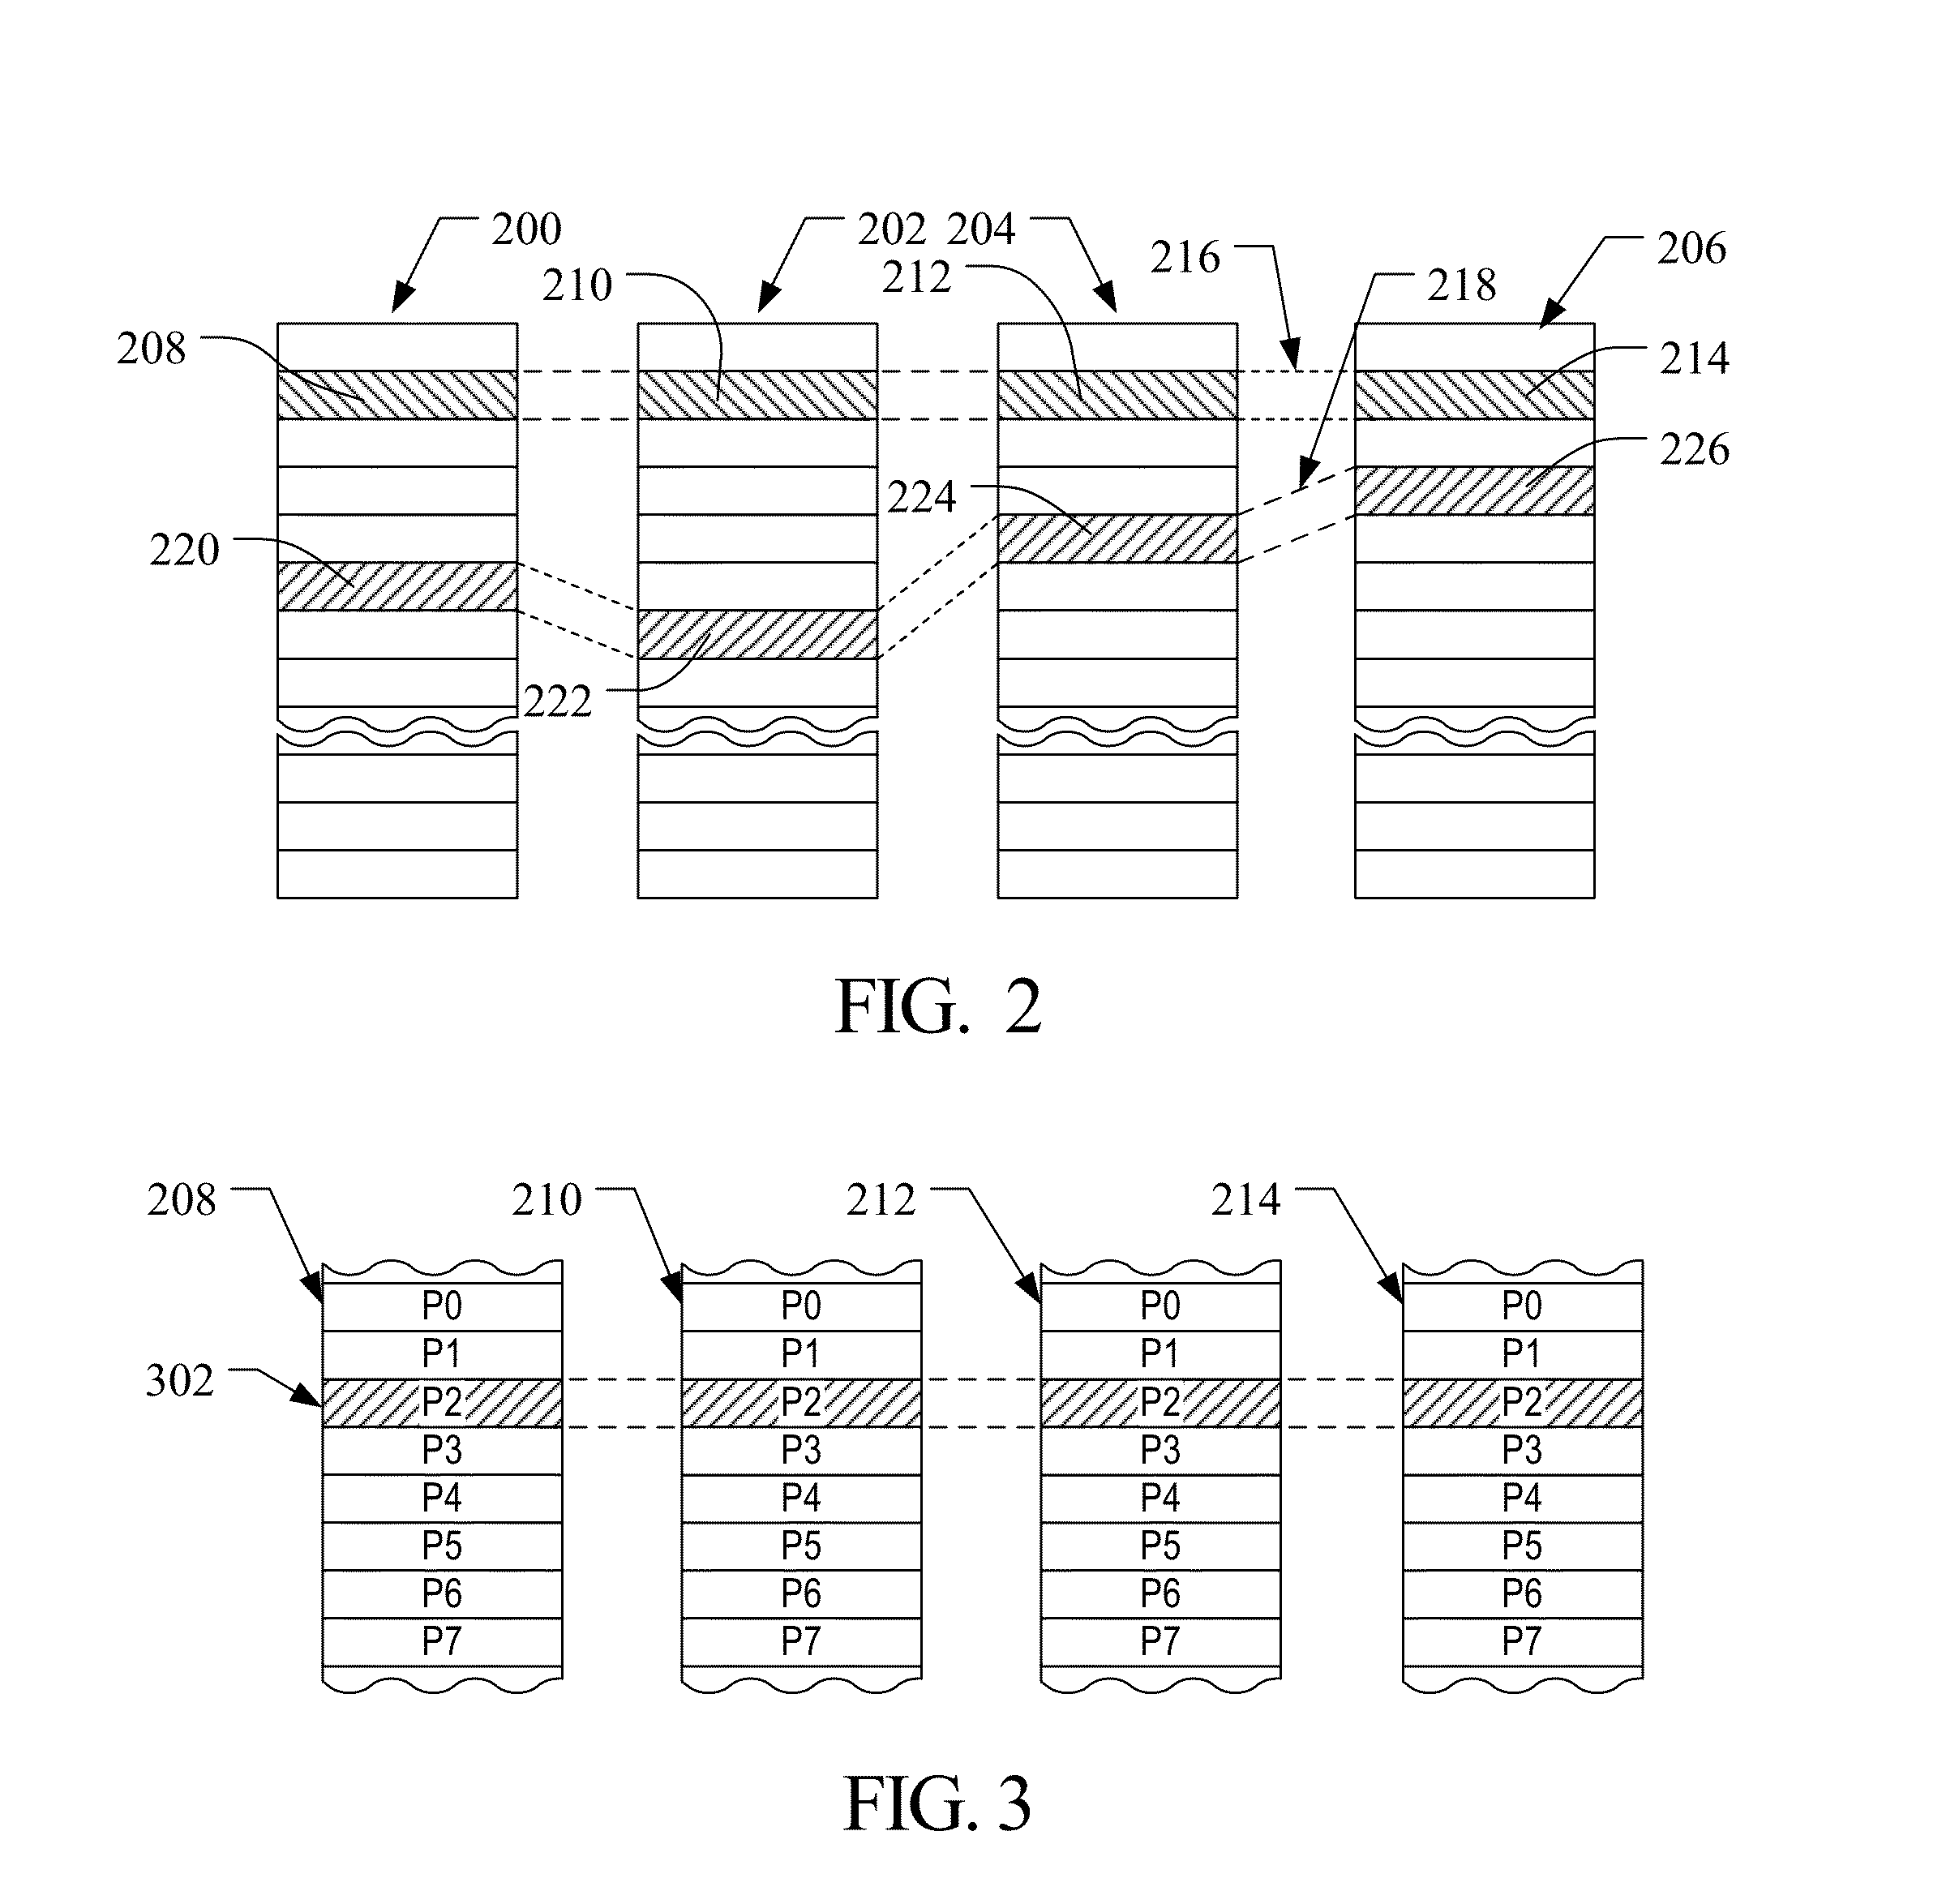 Usage of cache and write transaction information in a storage device